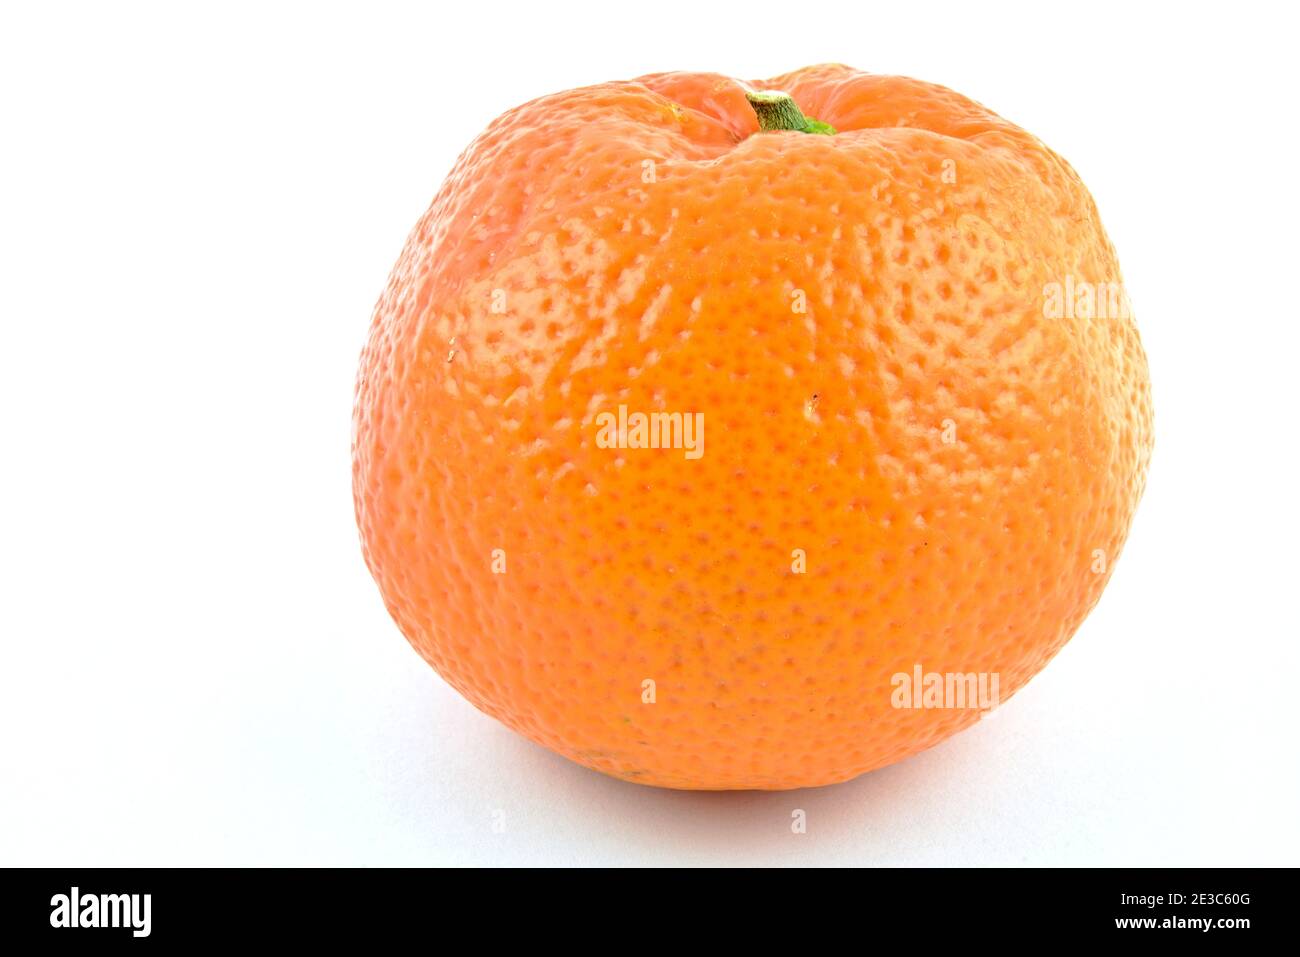 Orange Mandarin (Clementine). Fruit. Tangerine whole with a small stem. Separated on white background. Stock Photo